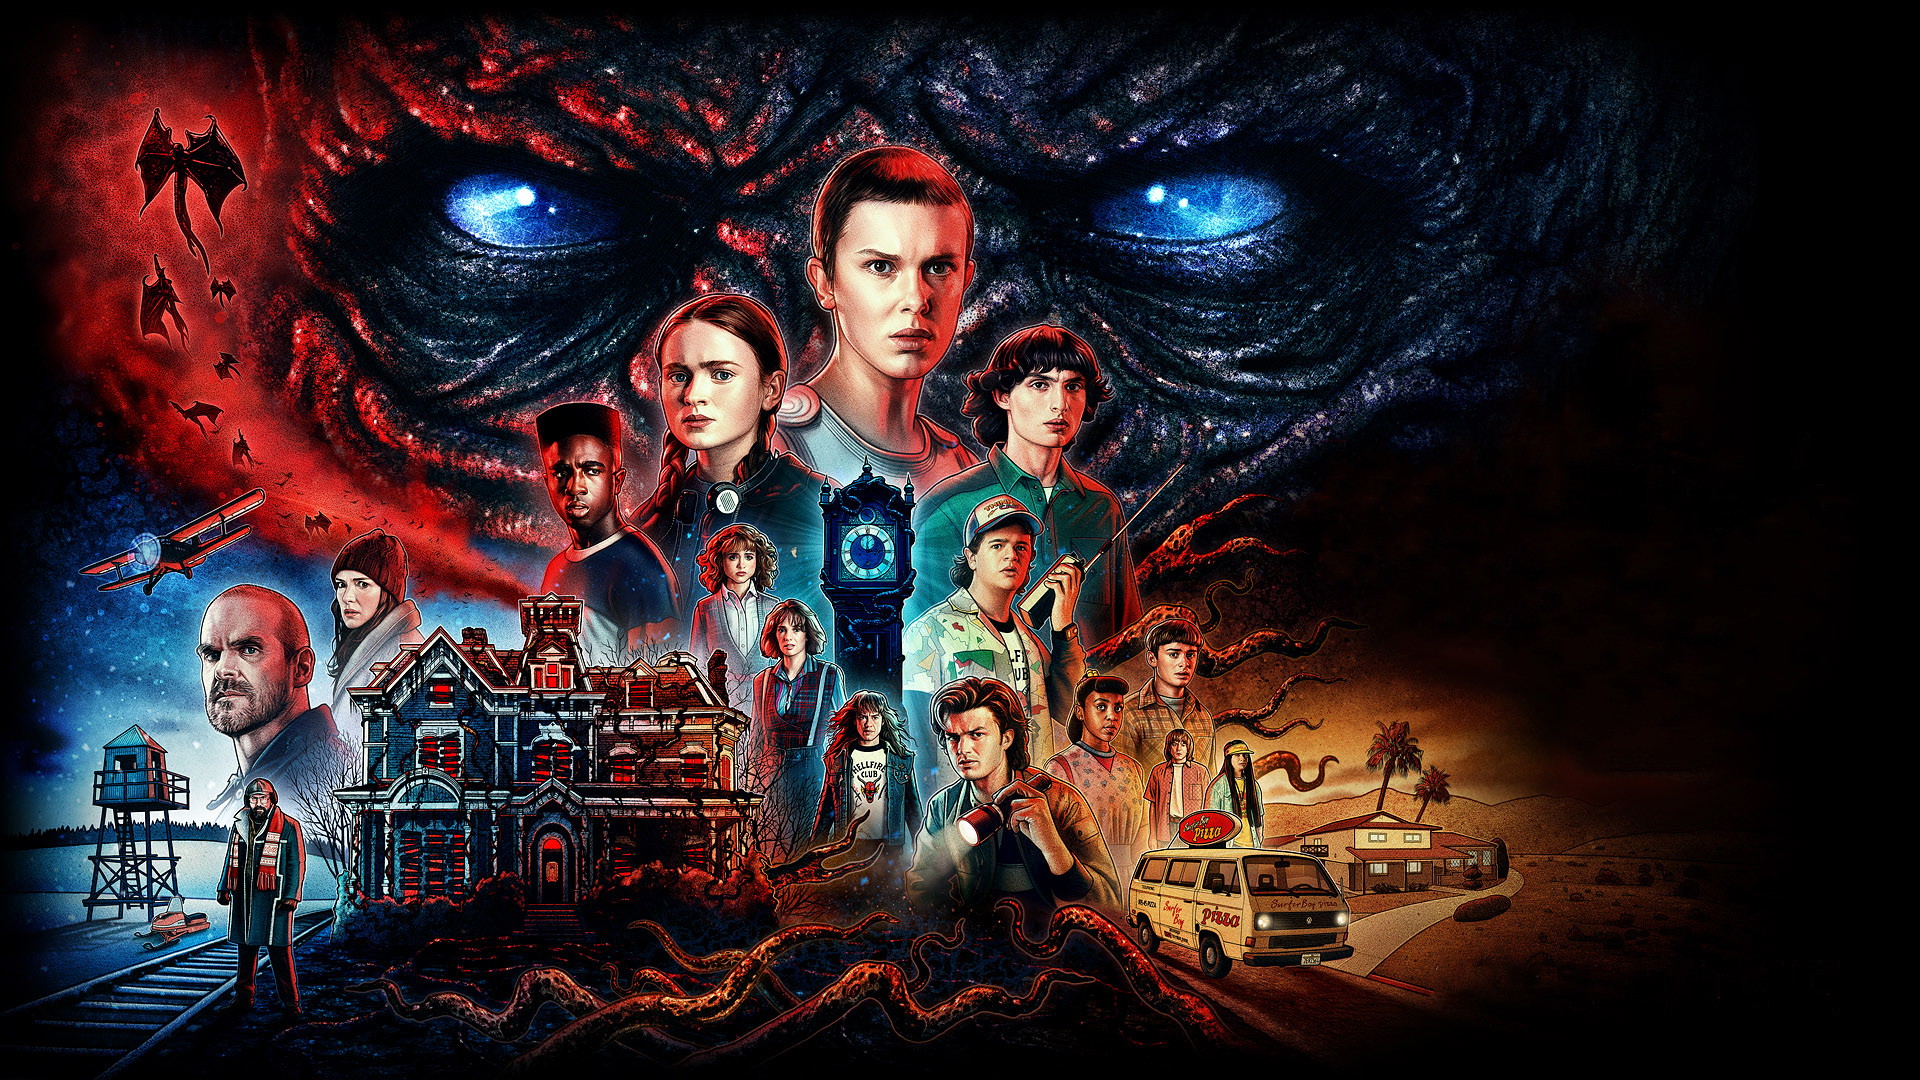 1680x10502019717 Stranger Things Season 4 Artwork 1680x10502019717  Resolution Wallpaper HD TV Series 4K Wallpapers Images Photos and  Background  Wallpapers Den